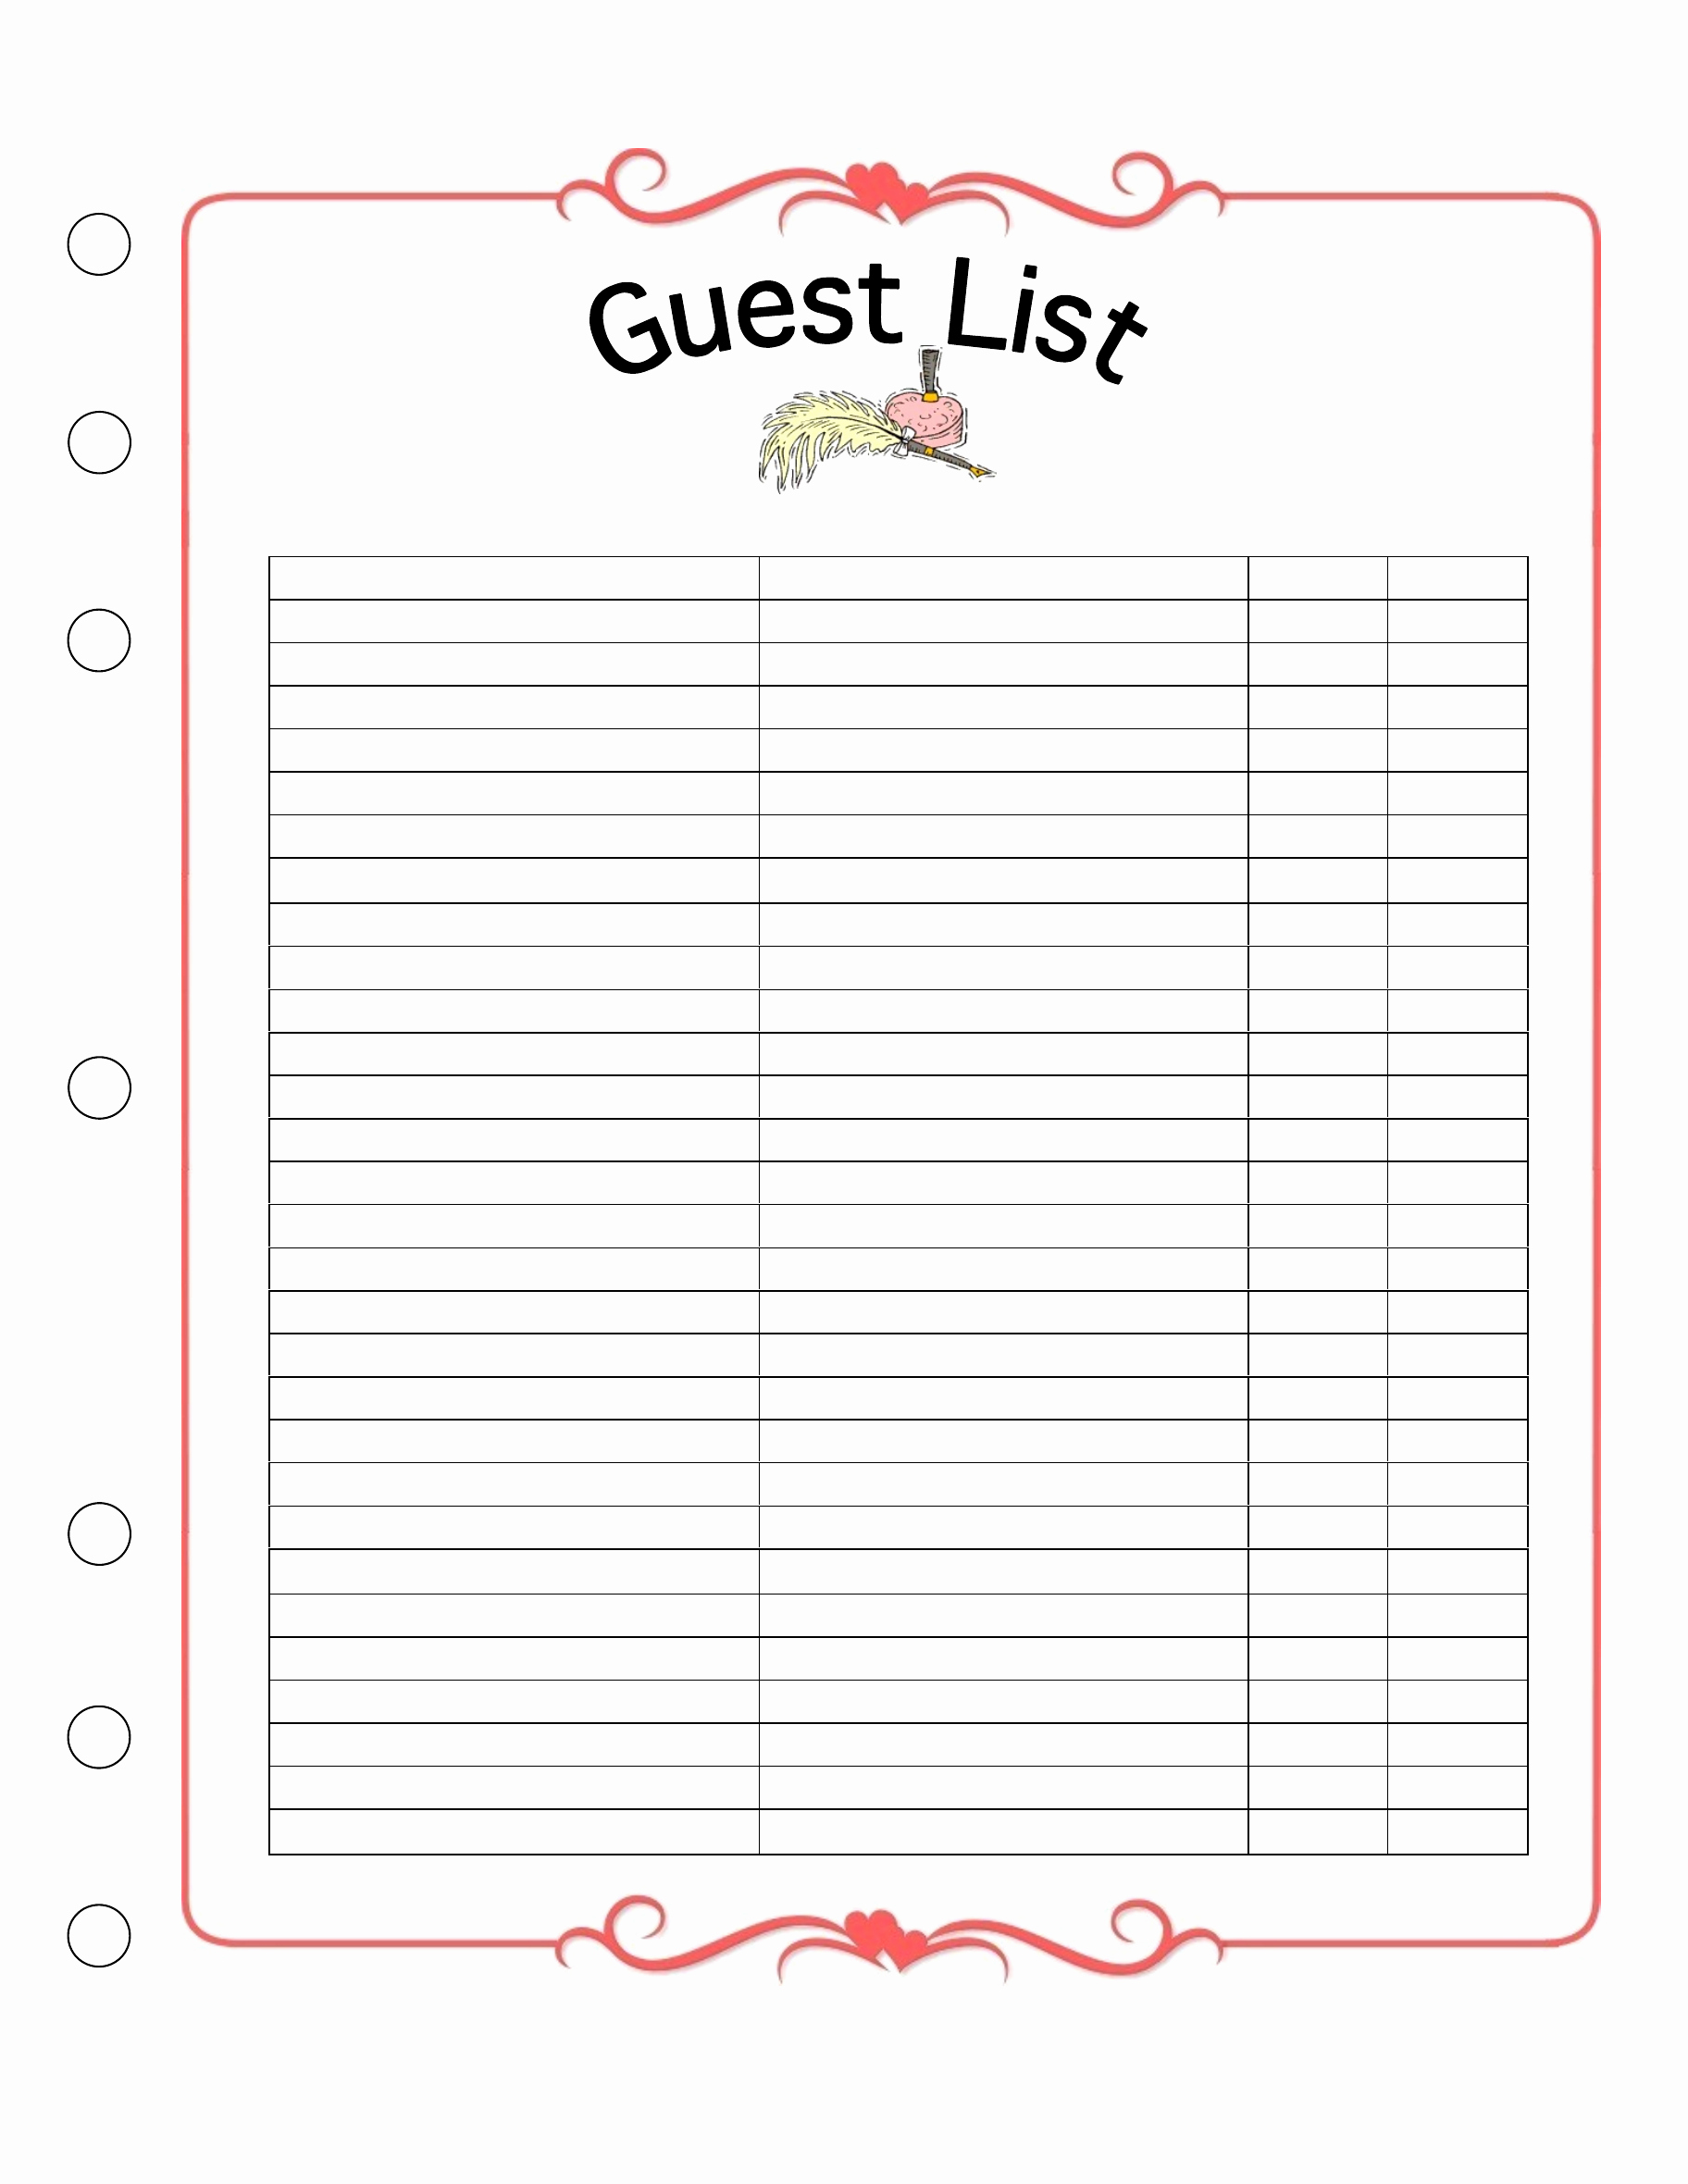 Wedding Guest List Template Free Download